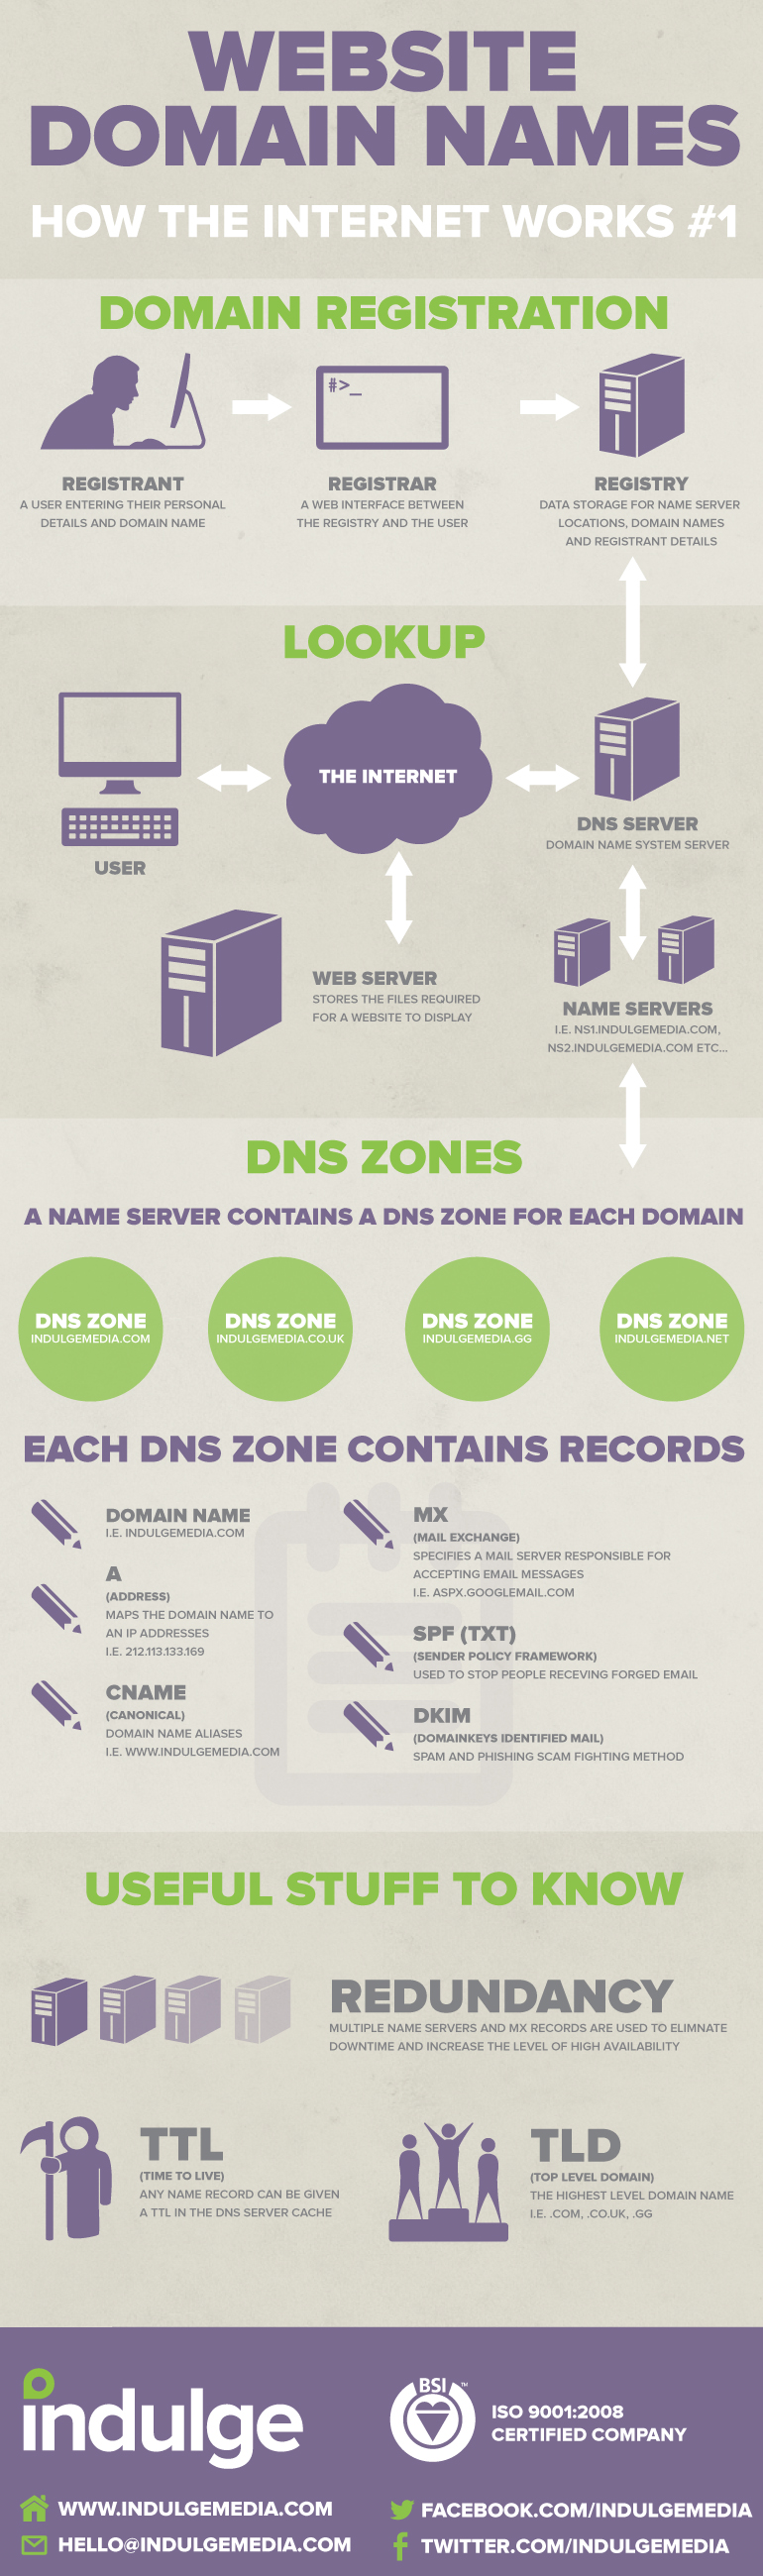 Website domain names infographic